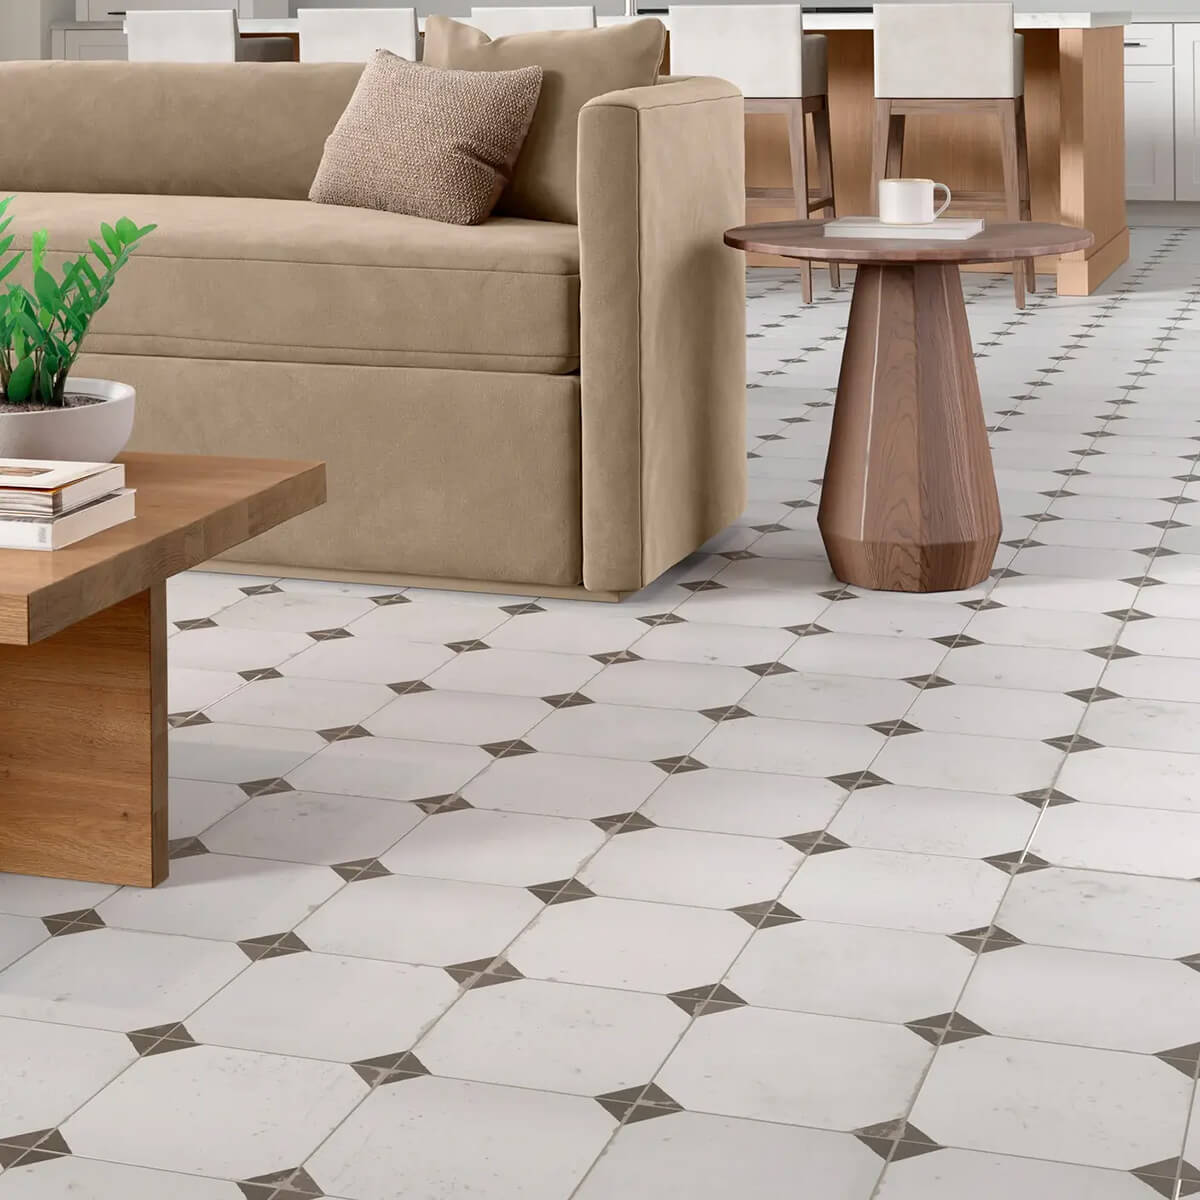 Tile flooring for living area | Carpet Collection